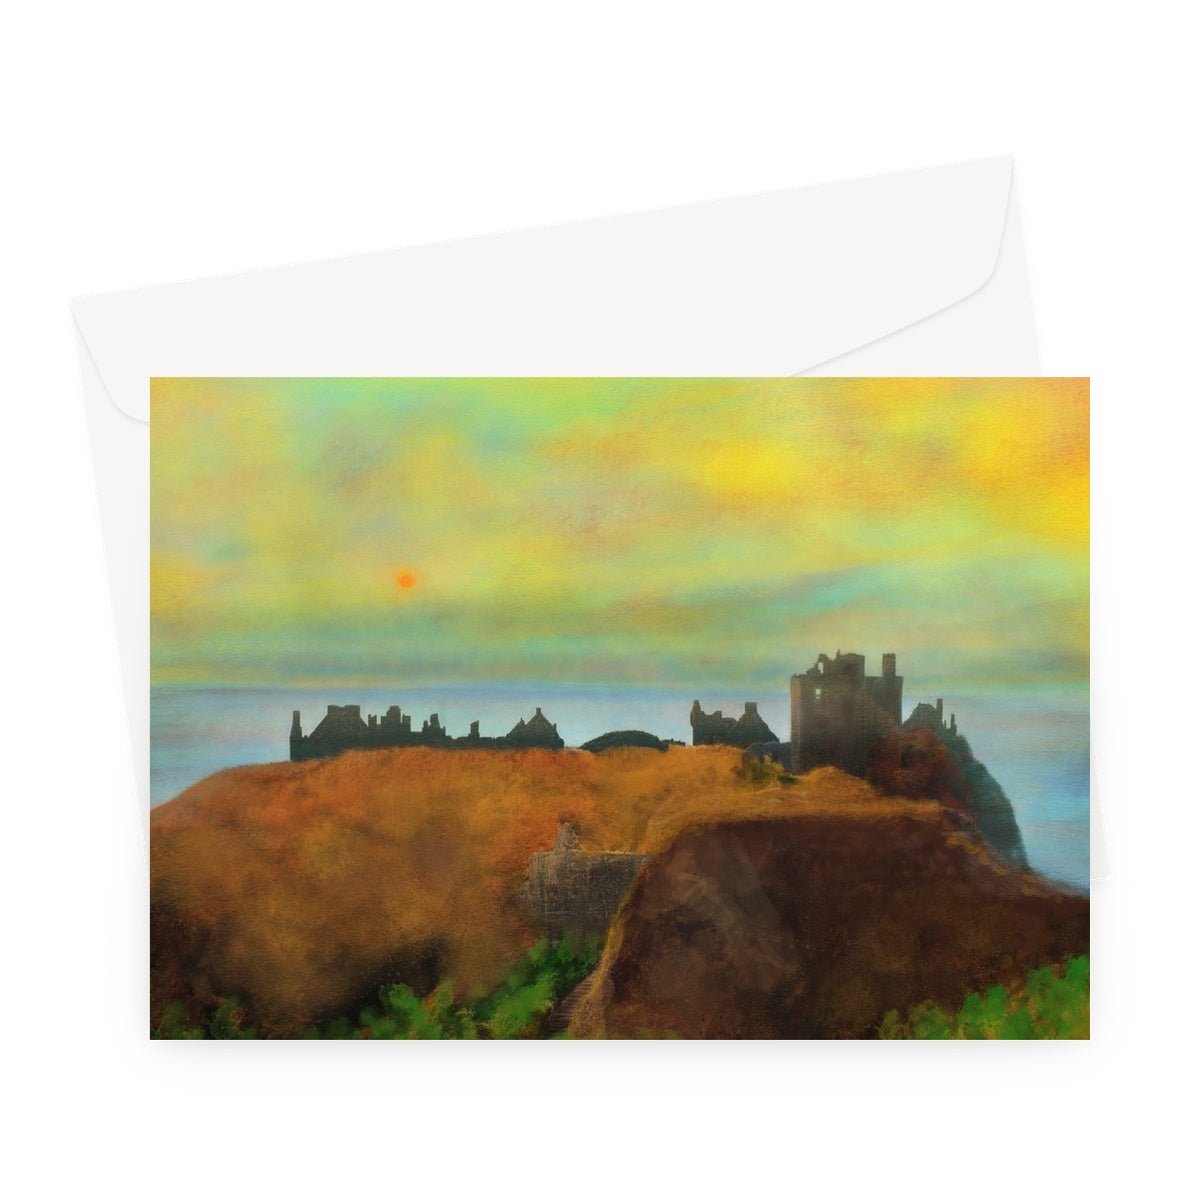 Dunnottar Castle Art Gifts Greeting Card-Greetings Cards-Scottish Castles Art Gallery-A5 Landscape-10 Cards-Paintings, Prints, Homeware, Art Gifts From Scotland By Scottish Artist Kevin Hunter